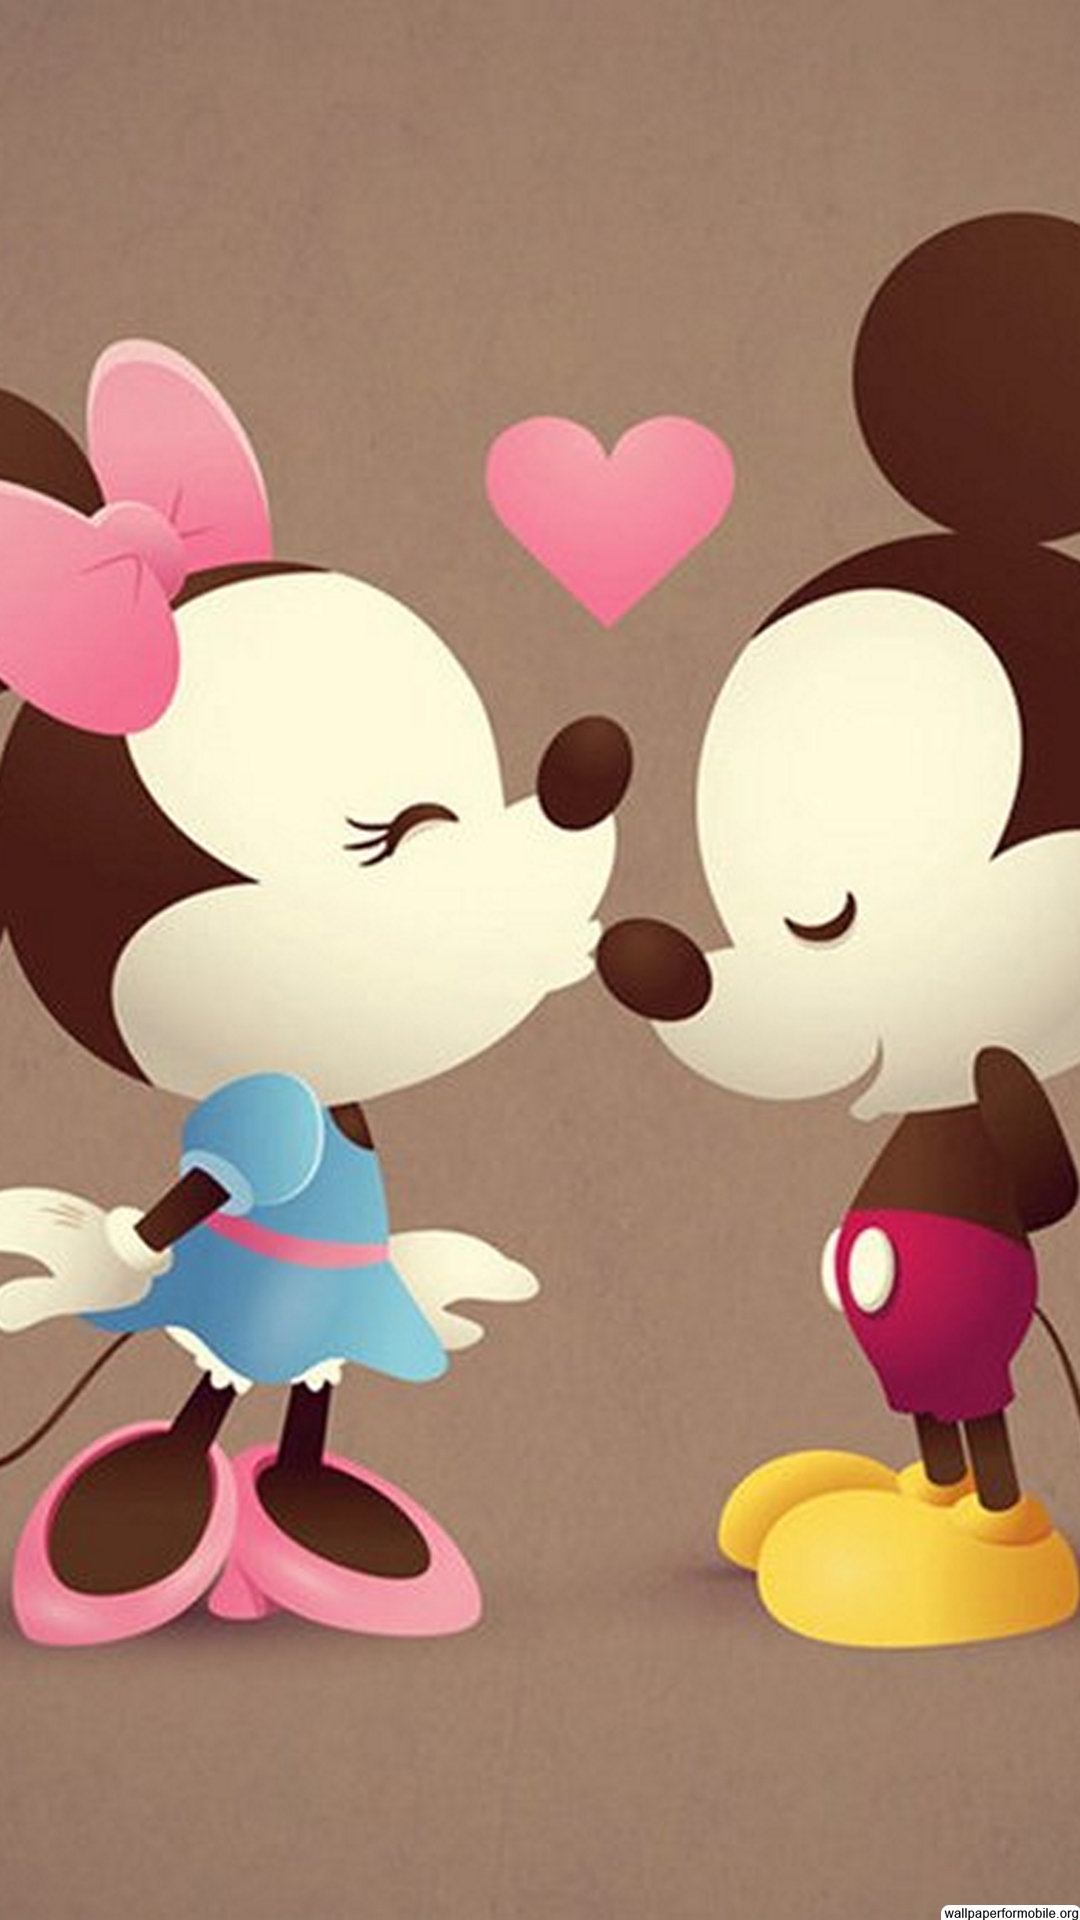 Mickey And Minnie Wallpapers - Mickey And Minnie Wallpaper Hd - 1080x1920  Wallpaper 